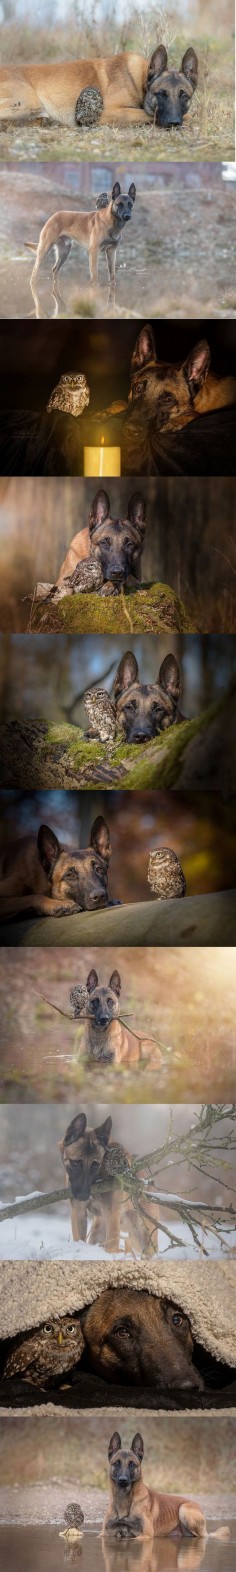 Credit to the photographer Tanja Brandt.